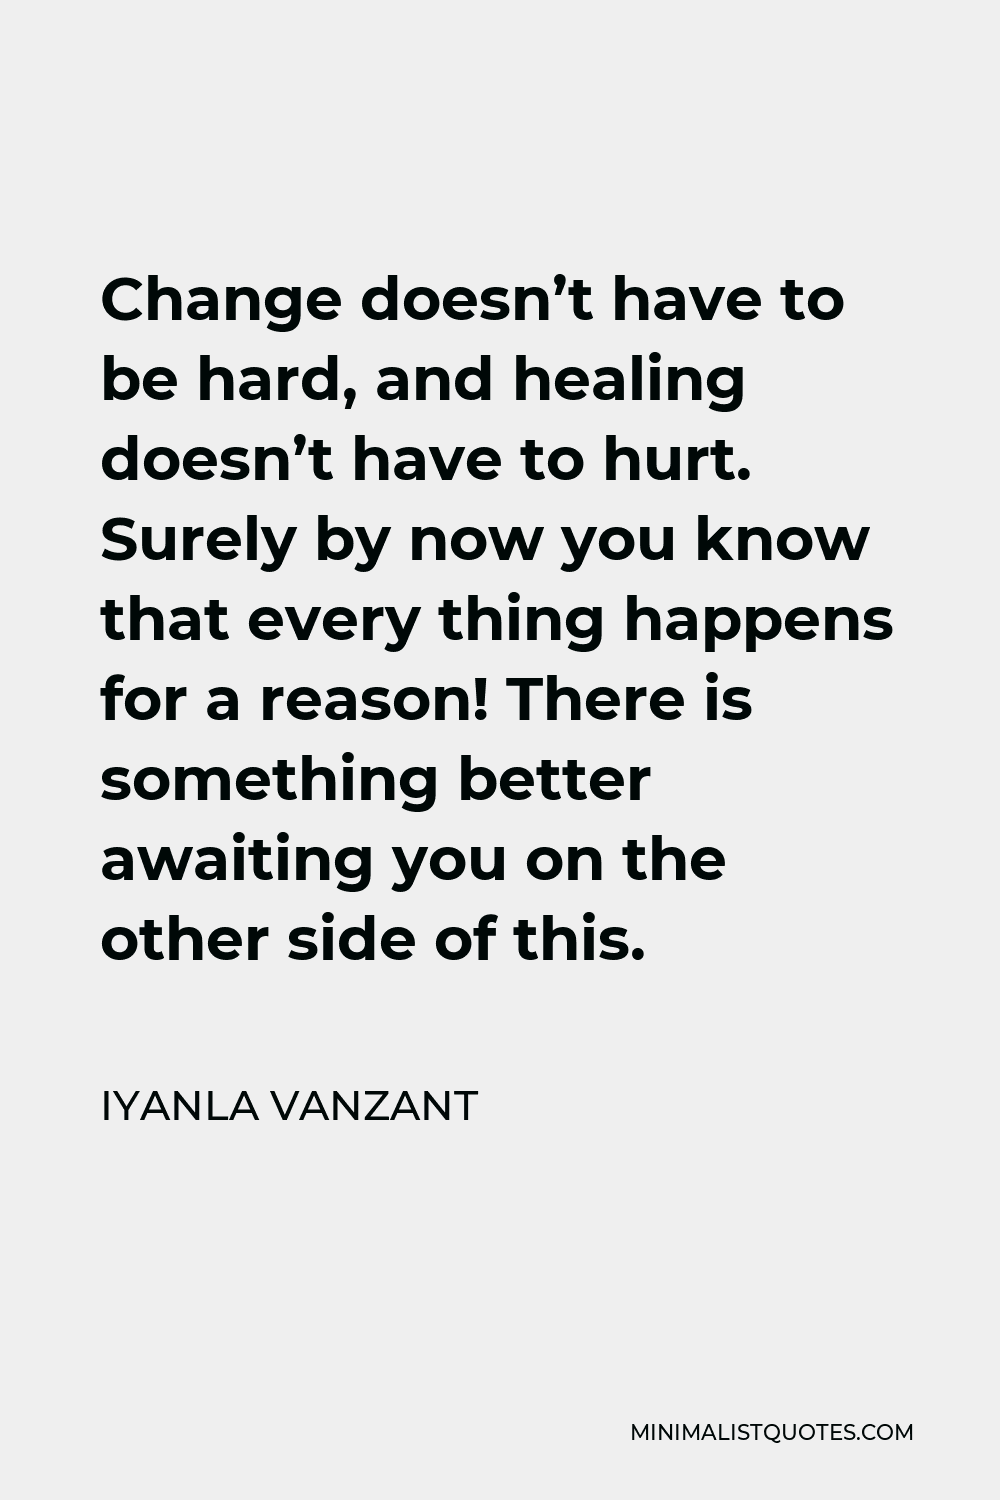 Iyanla Vanzant Quote - Change doesn’t have to be hard, and healing doesn’t have to hurt. Surely by now you know that every thing happens for a reason! There is something better awaiting you on the other side of this.